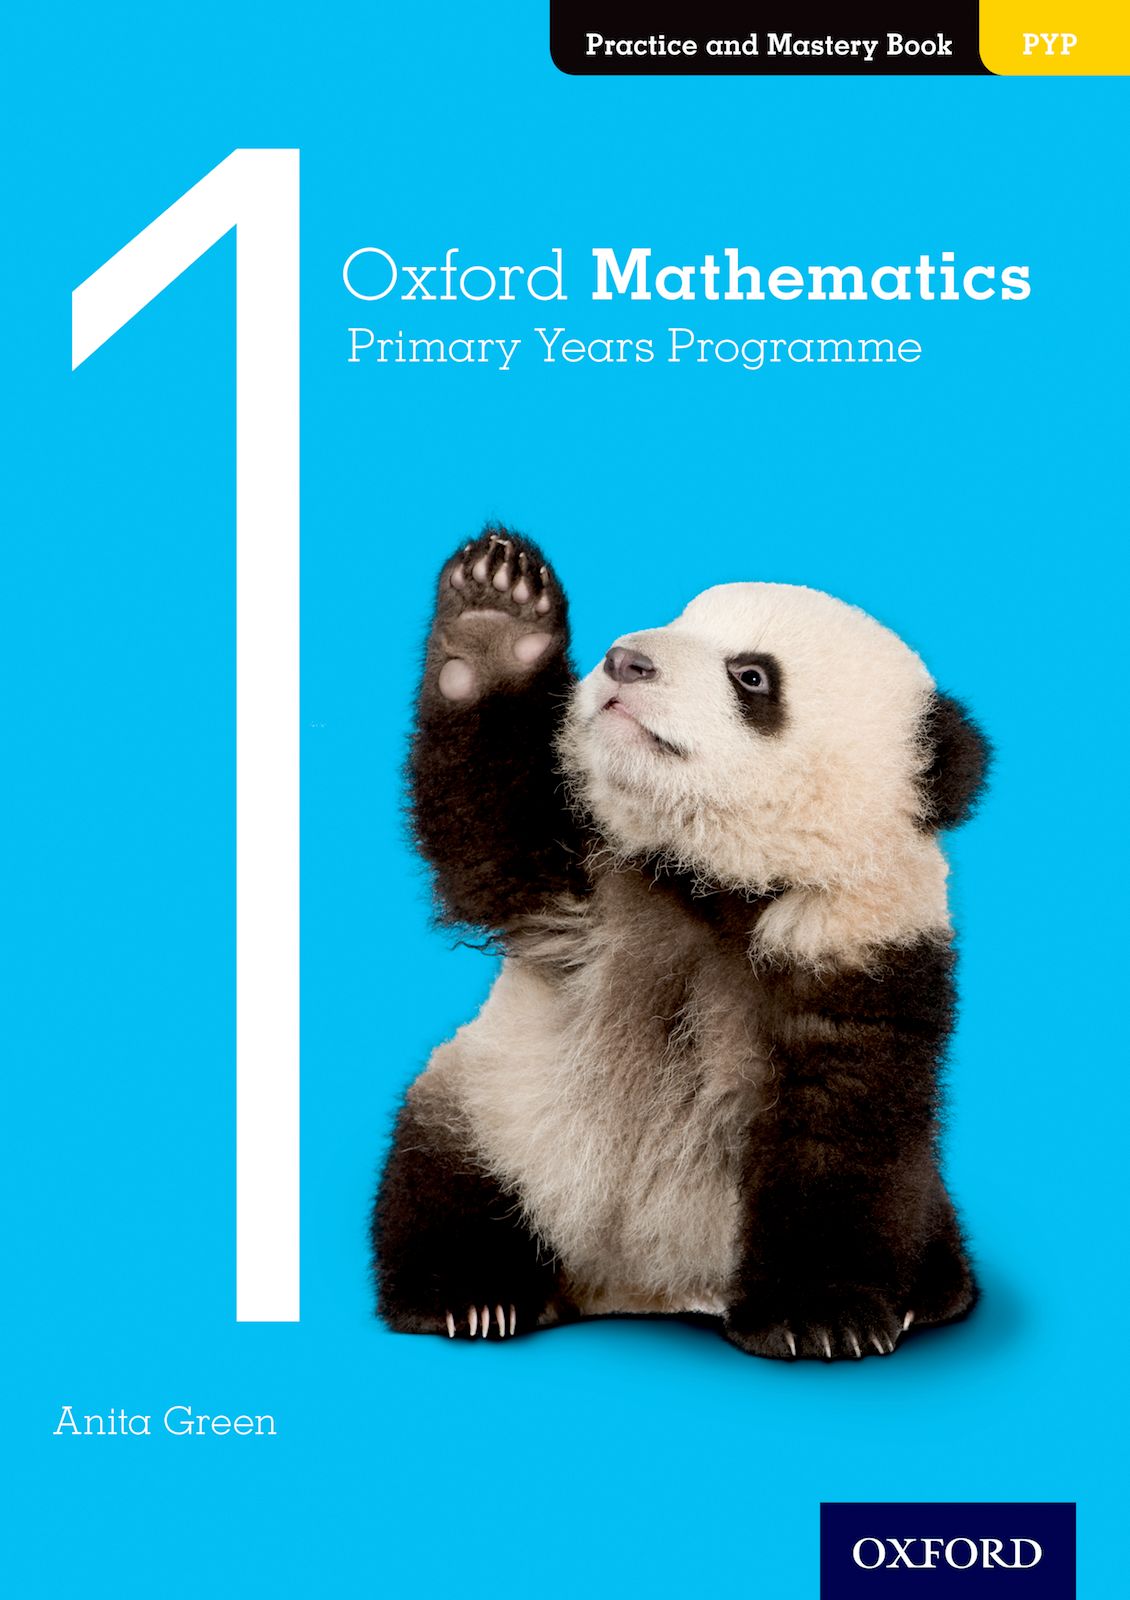 Featured image for “Oxford Mathematics Primary Years Programme Practice and Mastery Book 1”